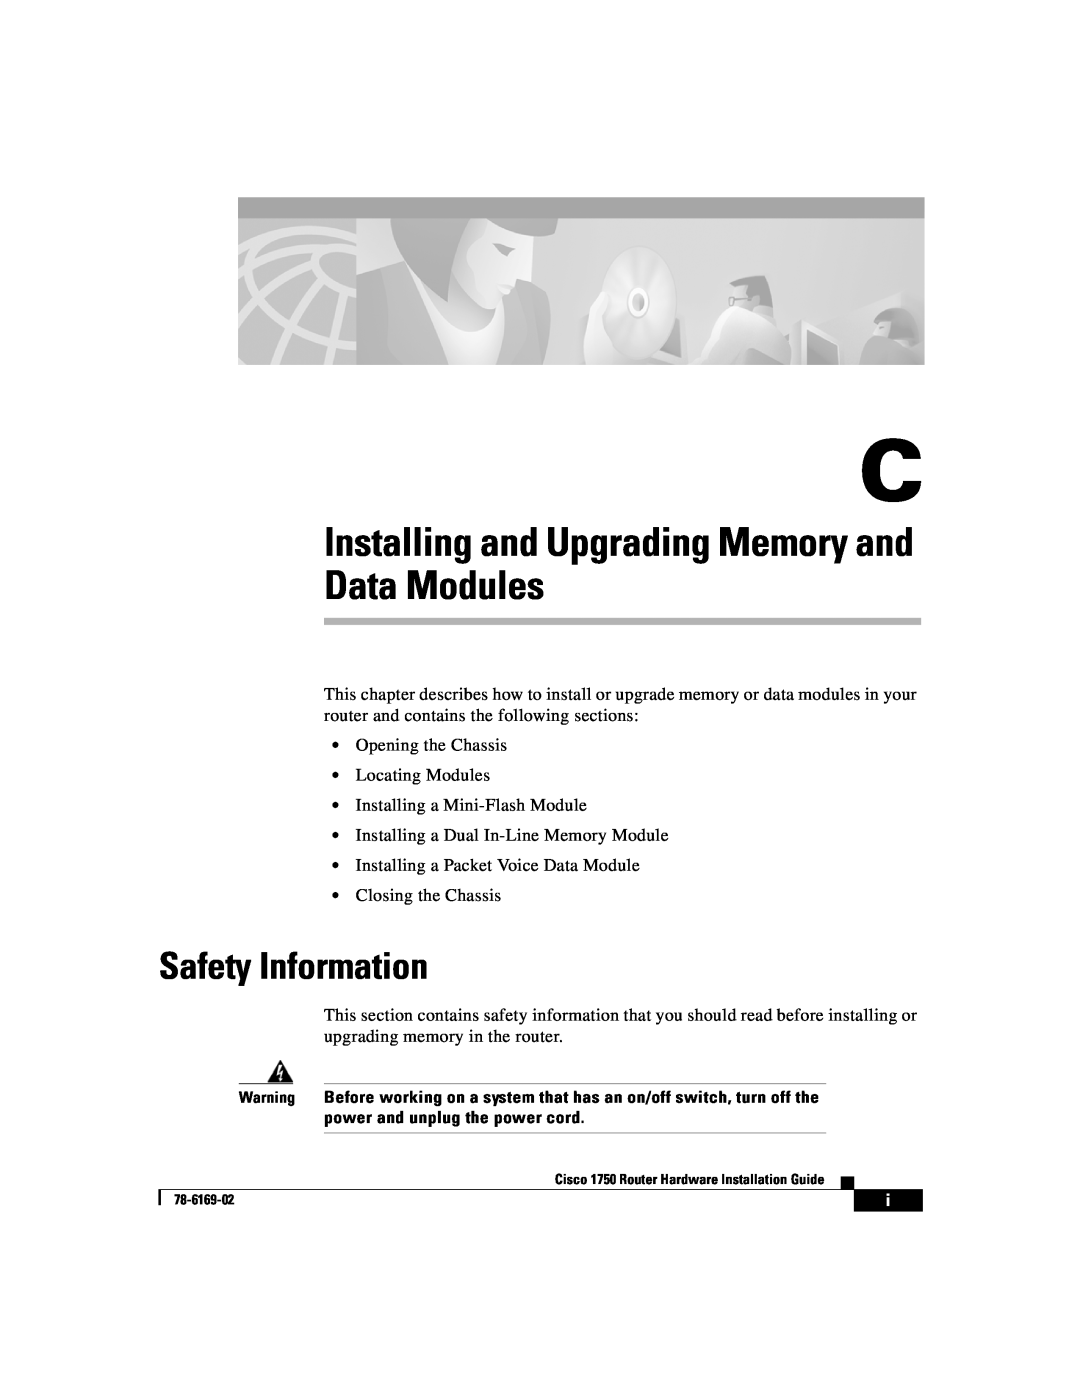 Cisco Systems CISCO1750 manual Installing and Upgrading Memory and Data Modules, Safety Information 